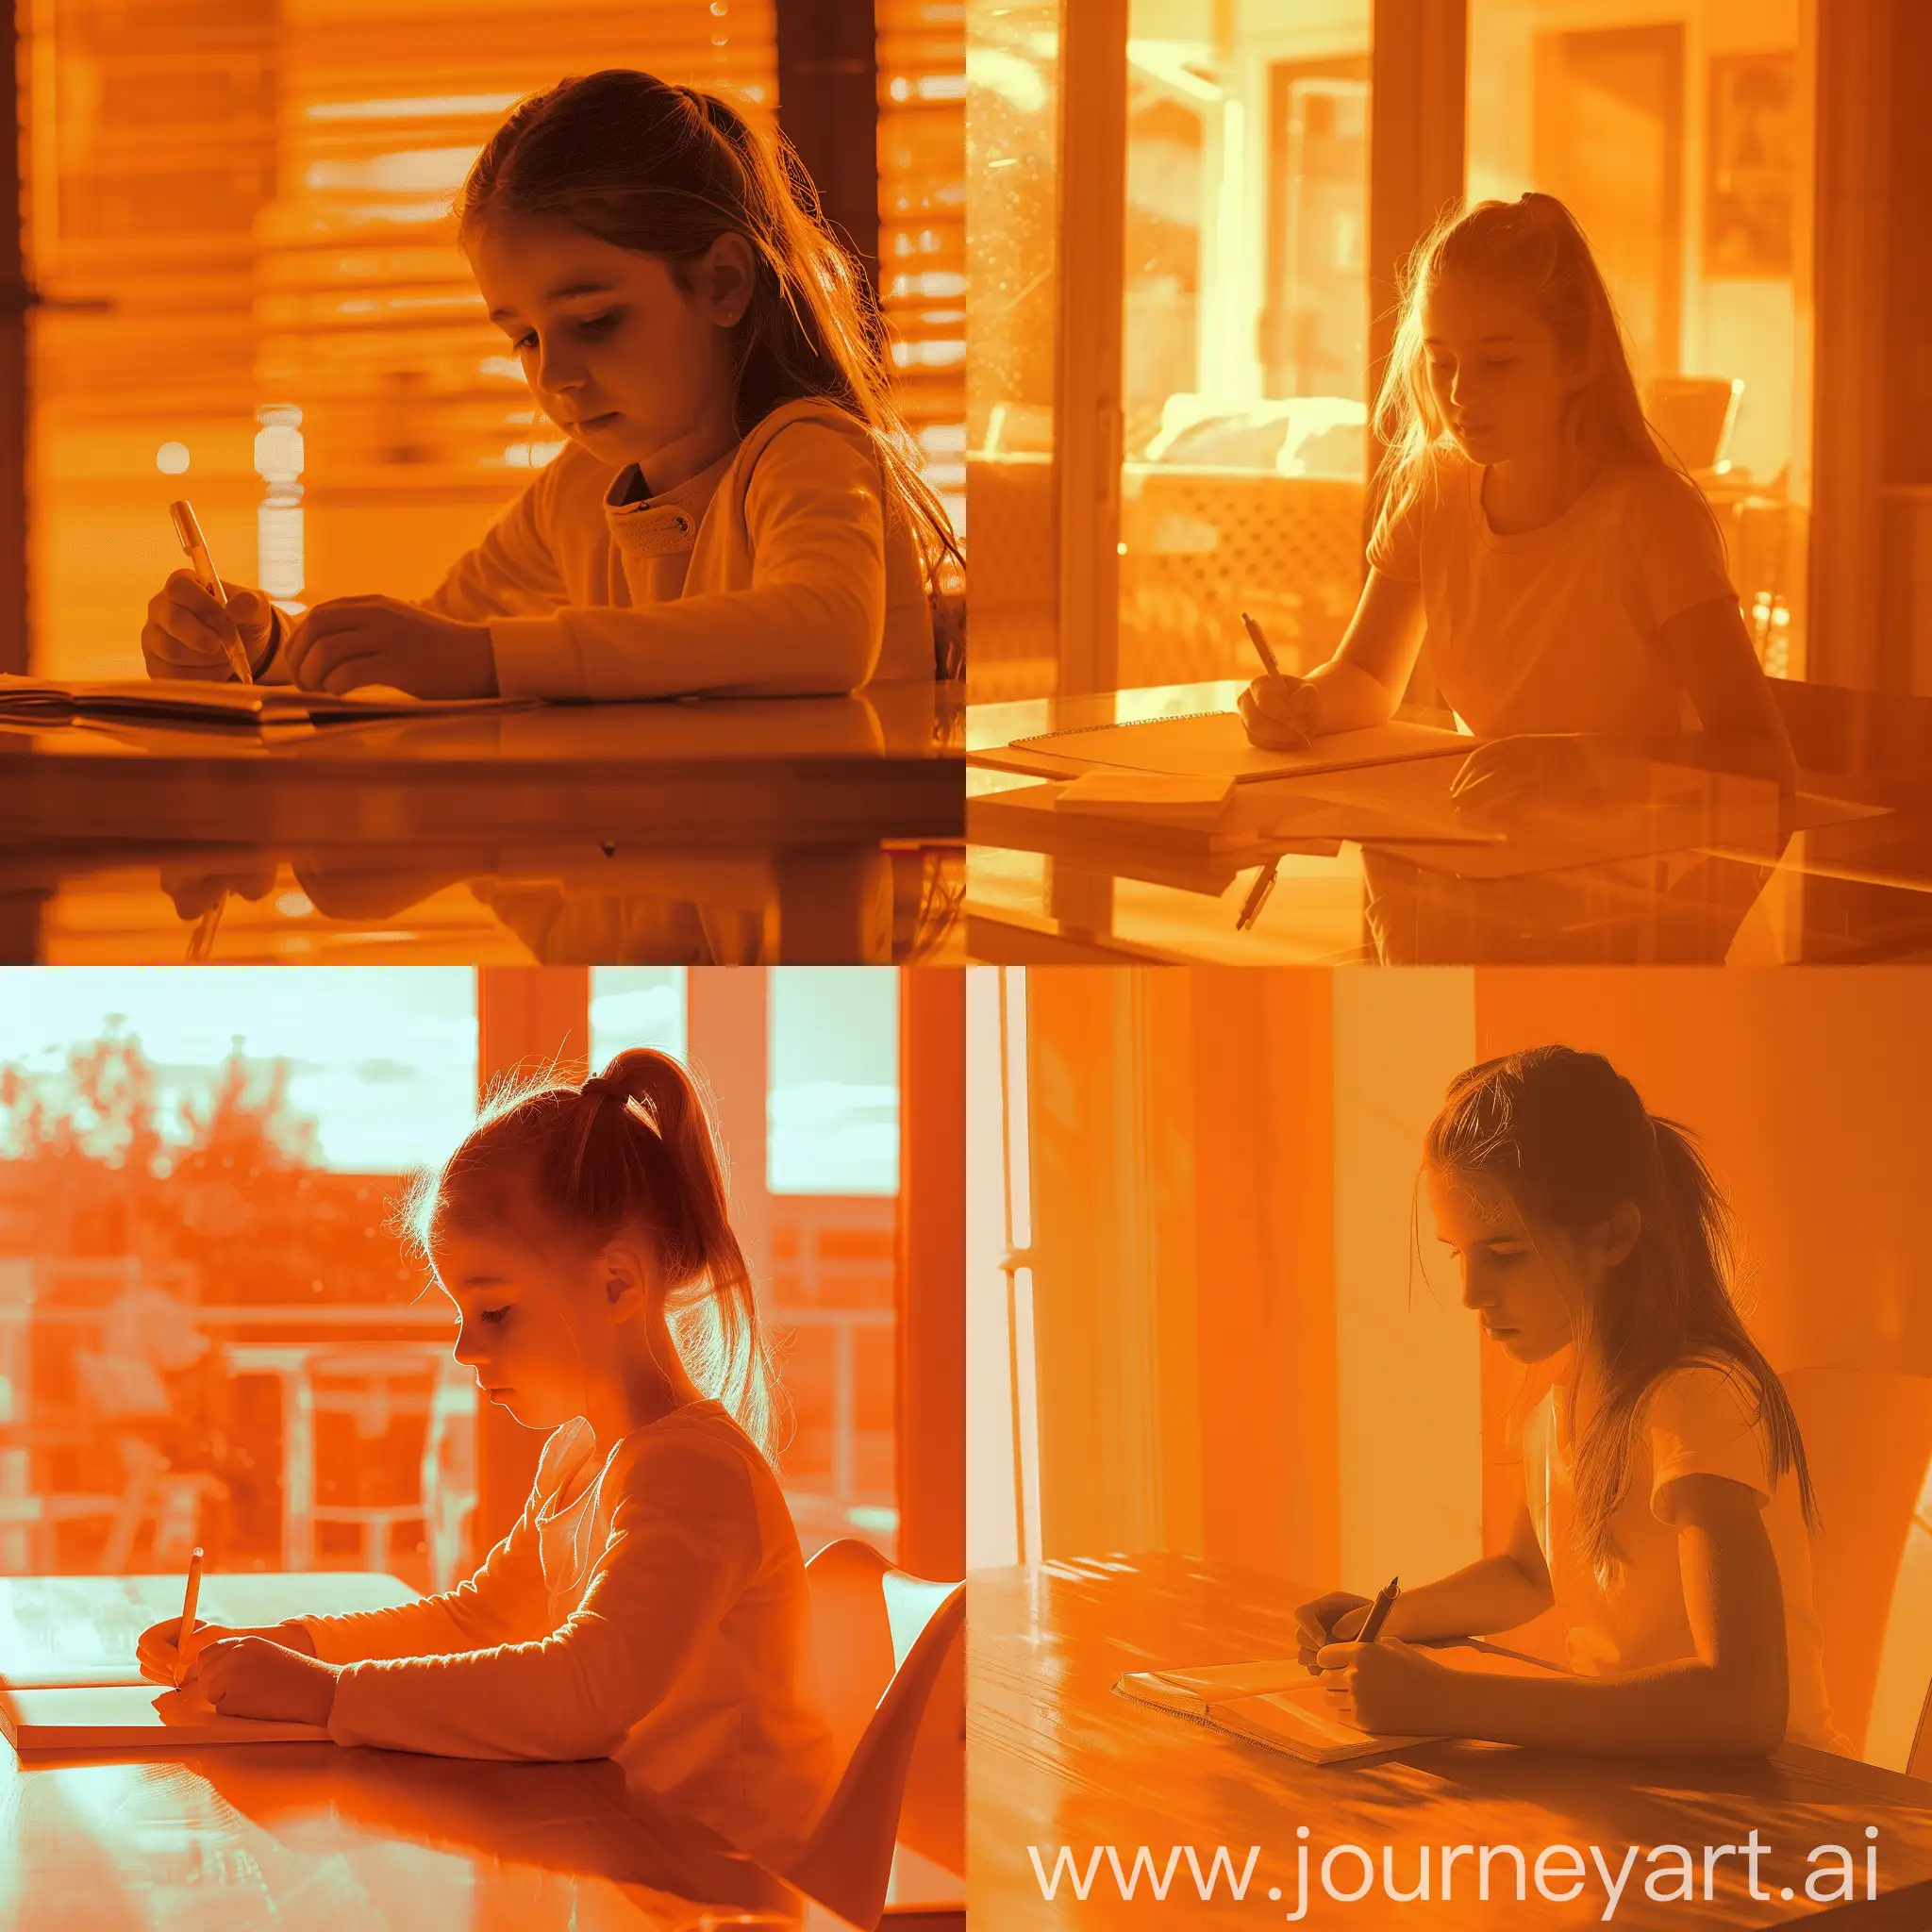 Focused-Girl-Studying-at-OrangeTinted-Table